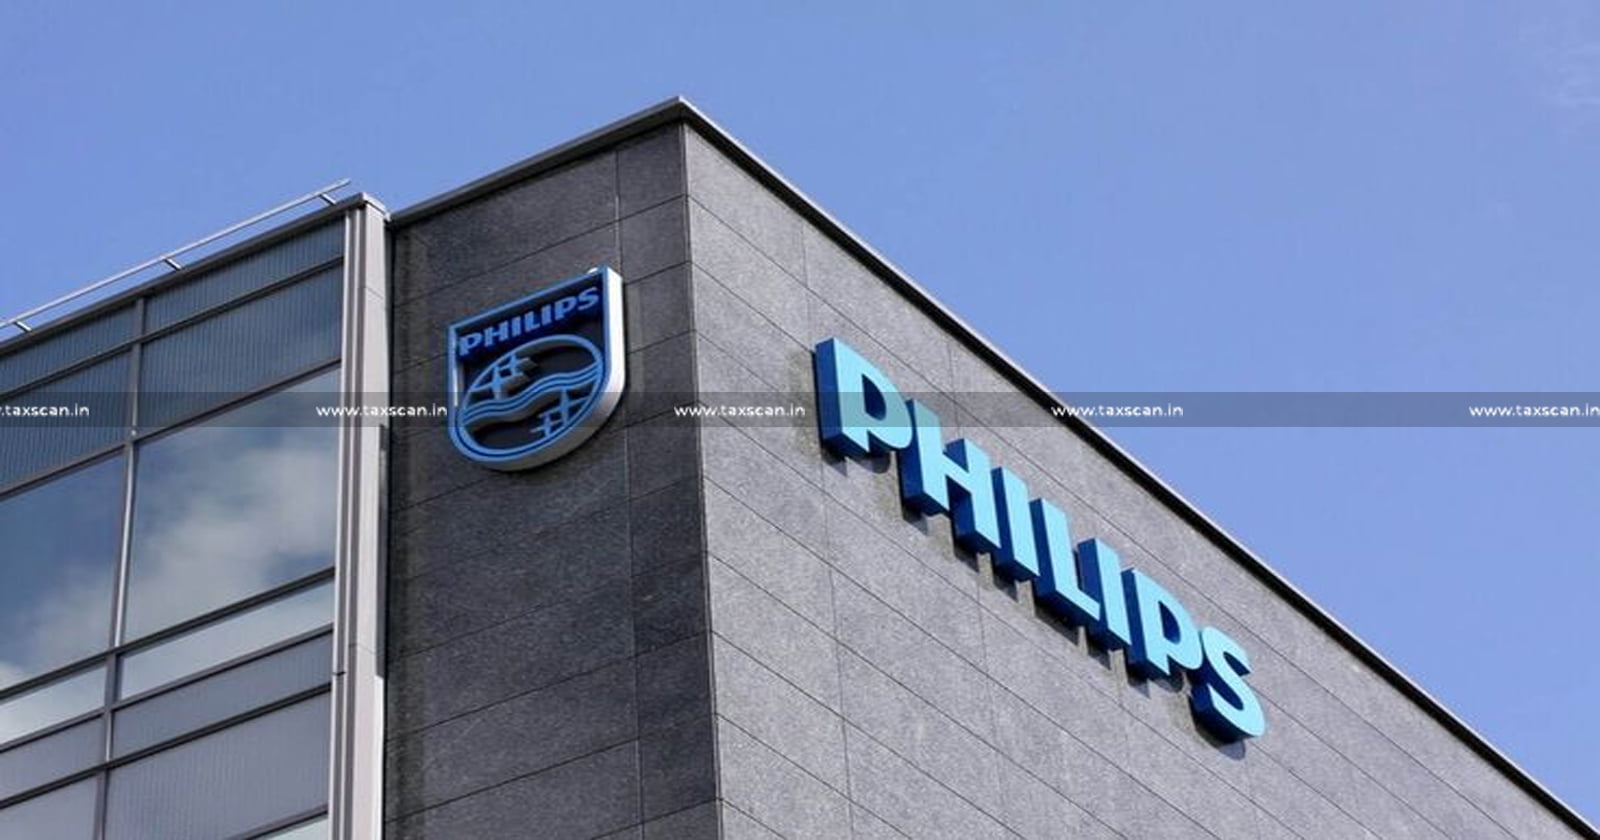 Accounting Specialist - Vacancy - Philips - jobscan